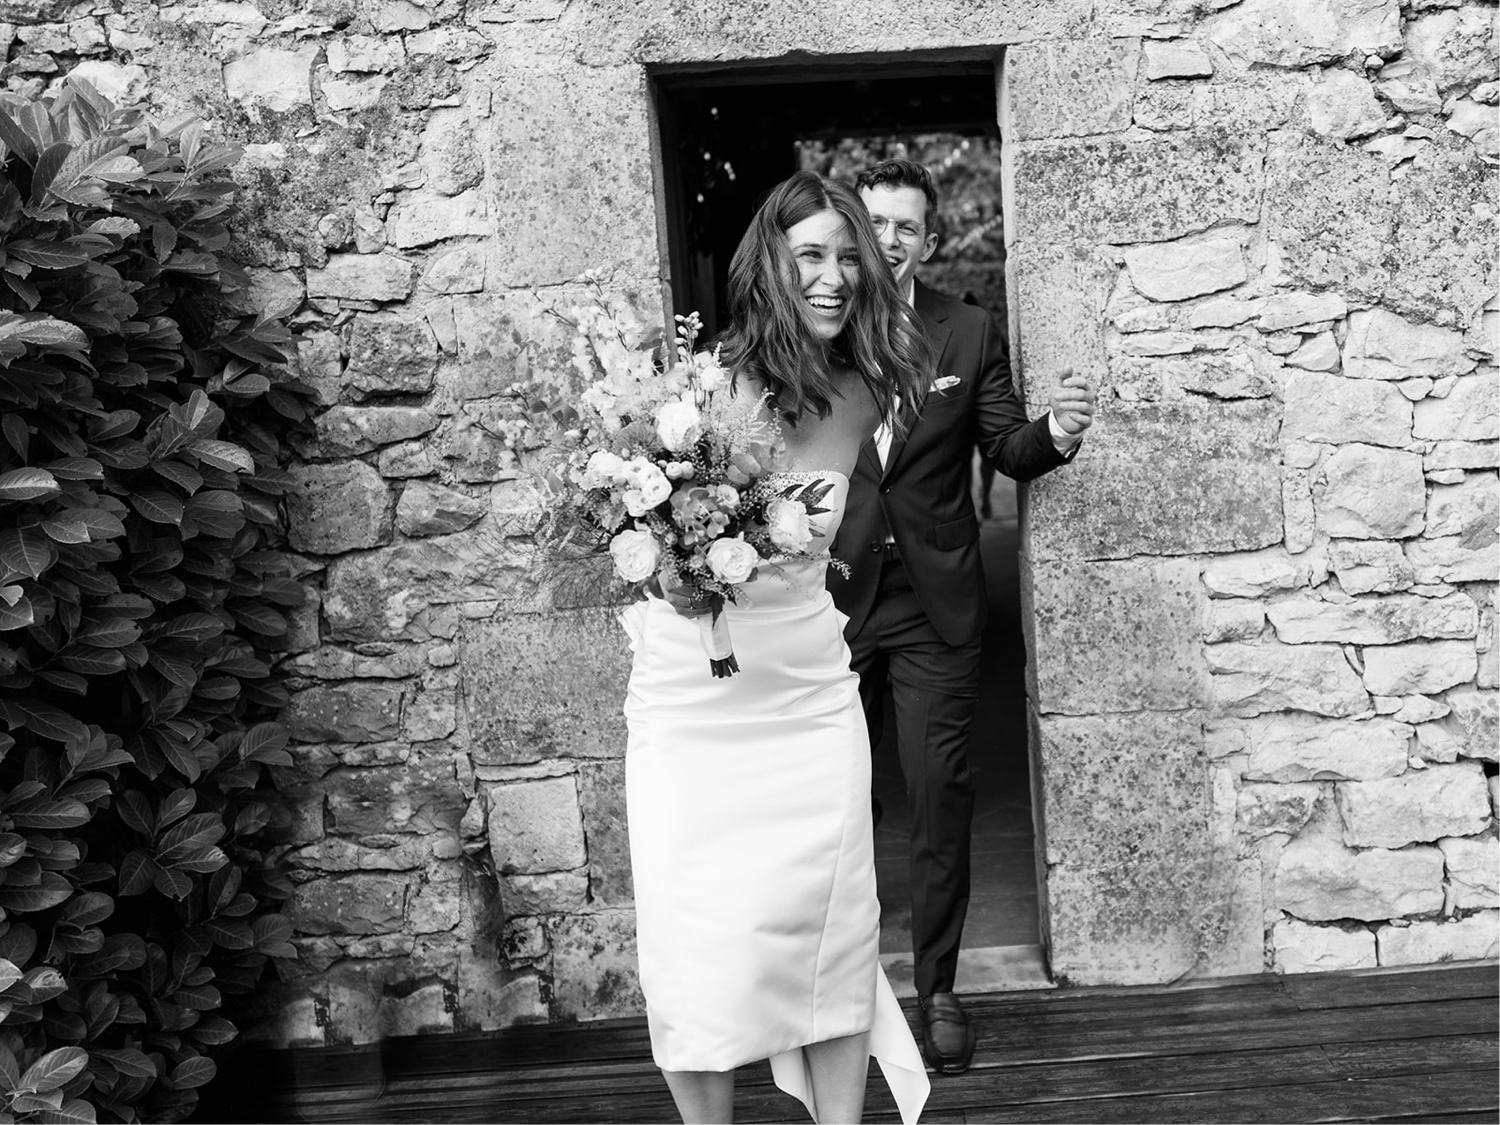 003_Intimate French chateau wedding at Chateau de Redon by top luxury destination photographer Ryan Flynn.jpg